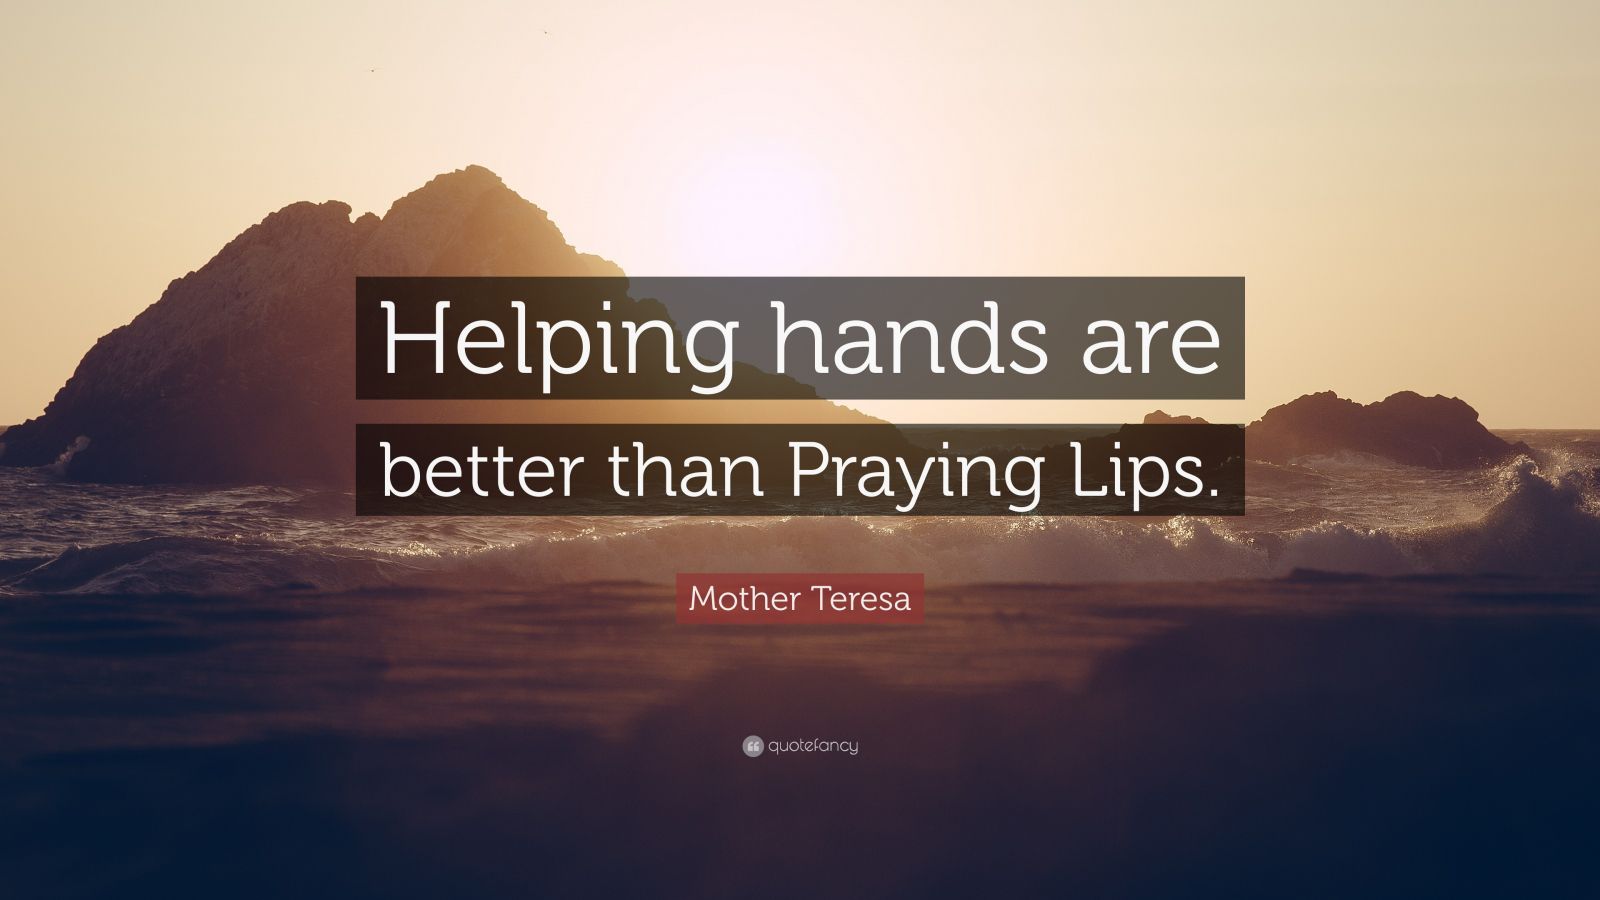 Mother Teresa Quote: “Helping hands are better than Praying Lips.” (12 ...